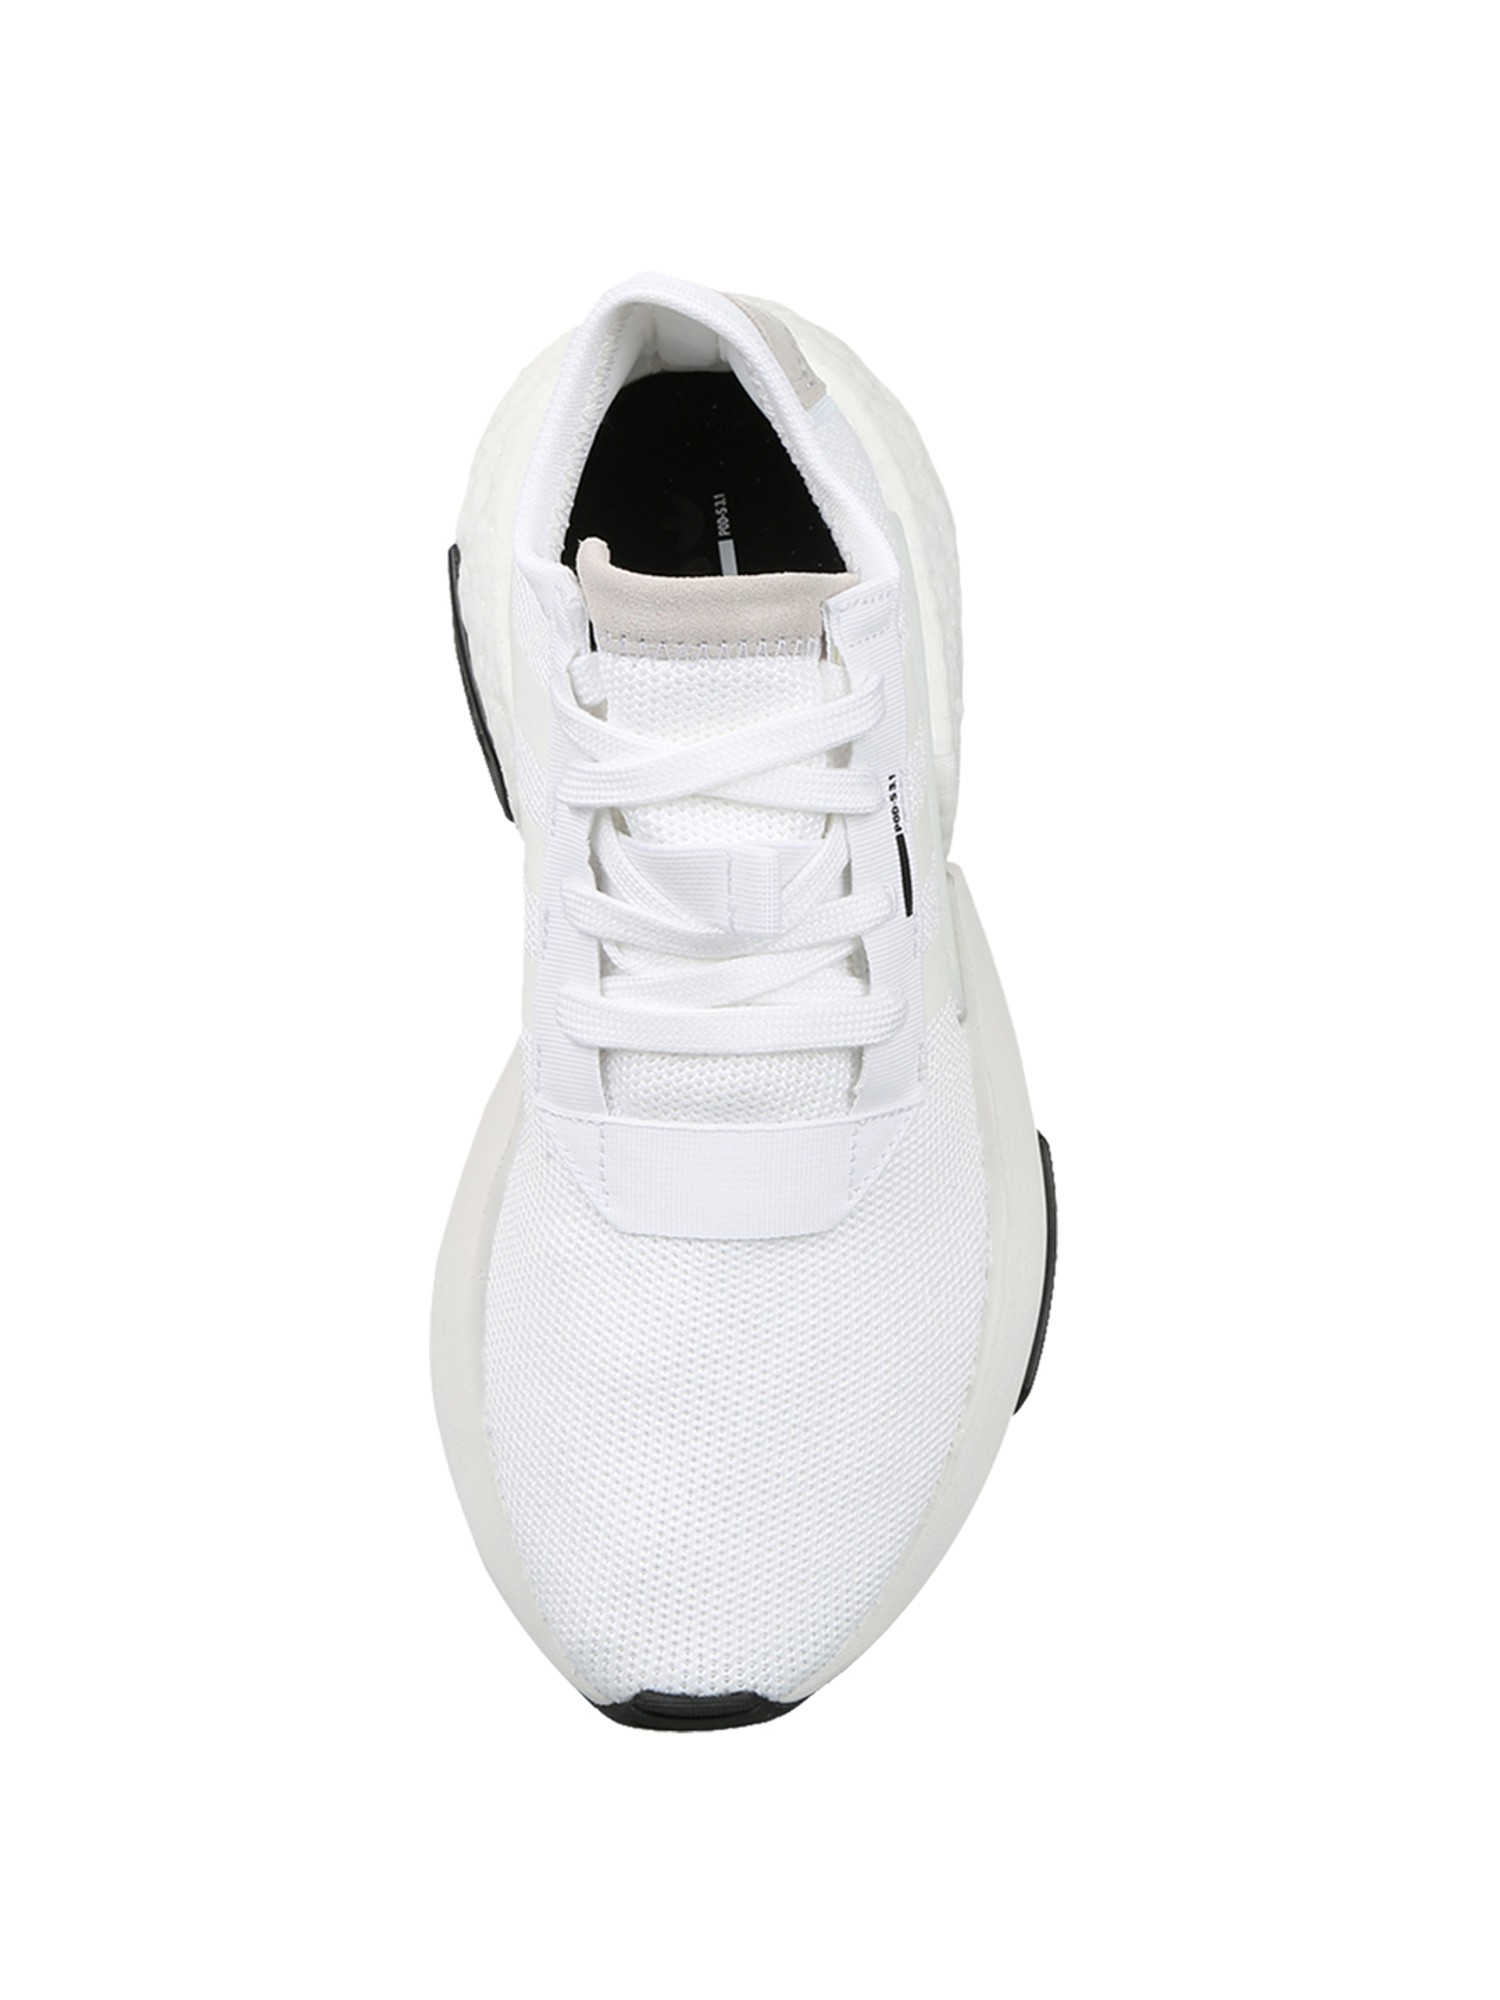 chat catch a cold remember Buy Adidas Original Pod-S3.1 White Sneakers for Men at Best Price @ Tata  CLiQ